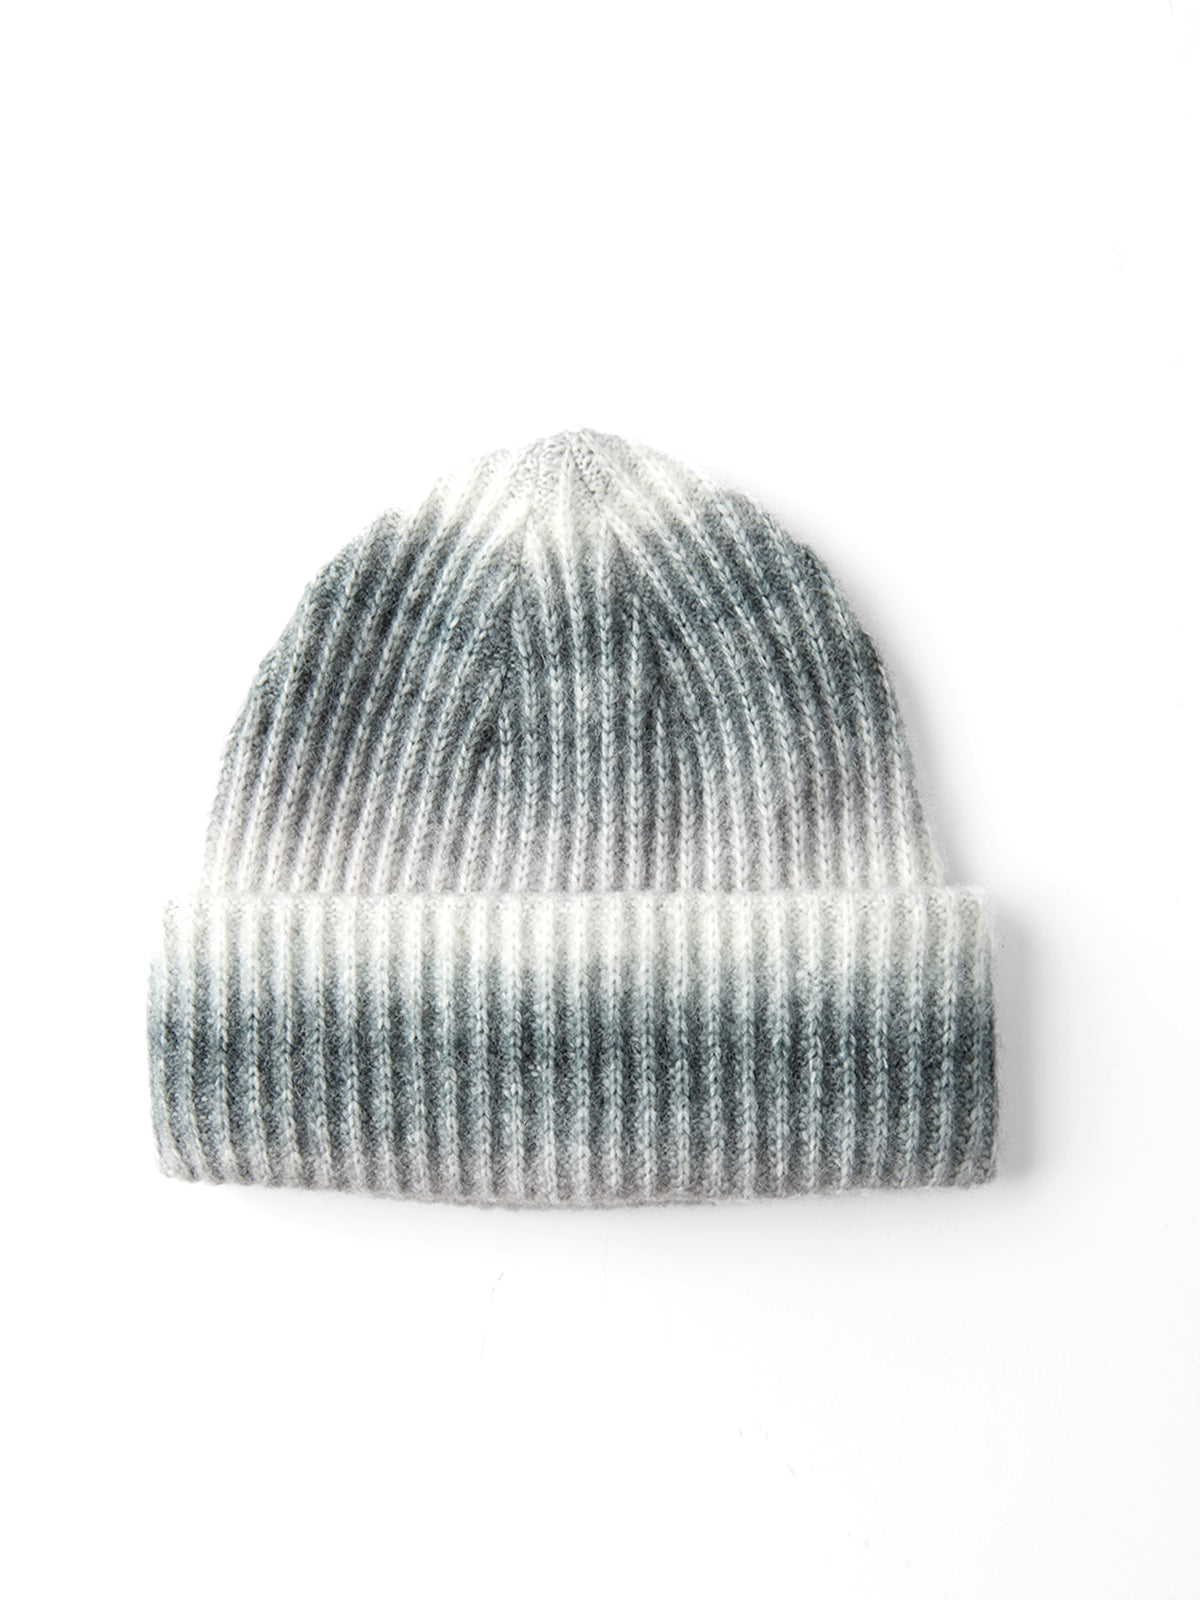 Ombre Beanie Hat